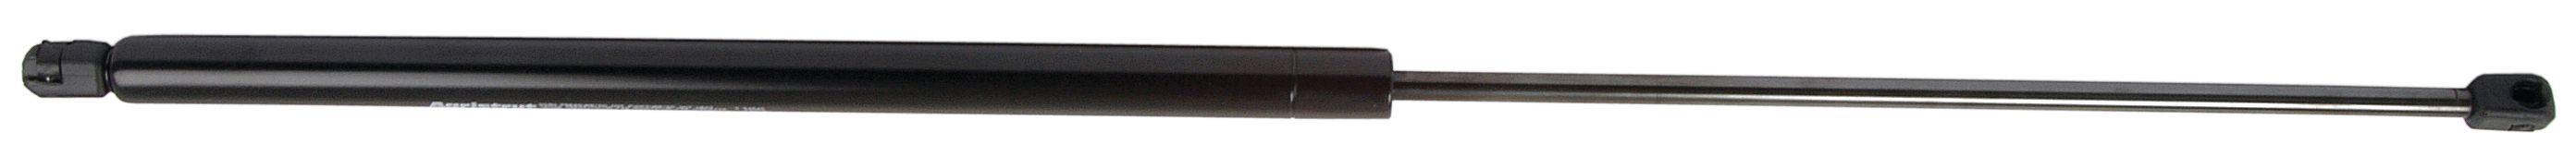 FORD NEW HOLLAND GAS STRUT 54540